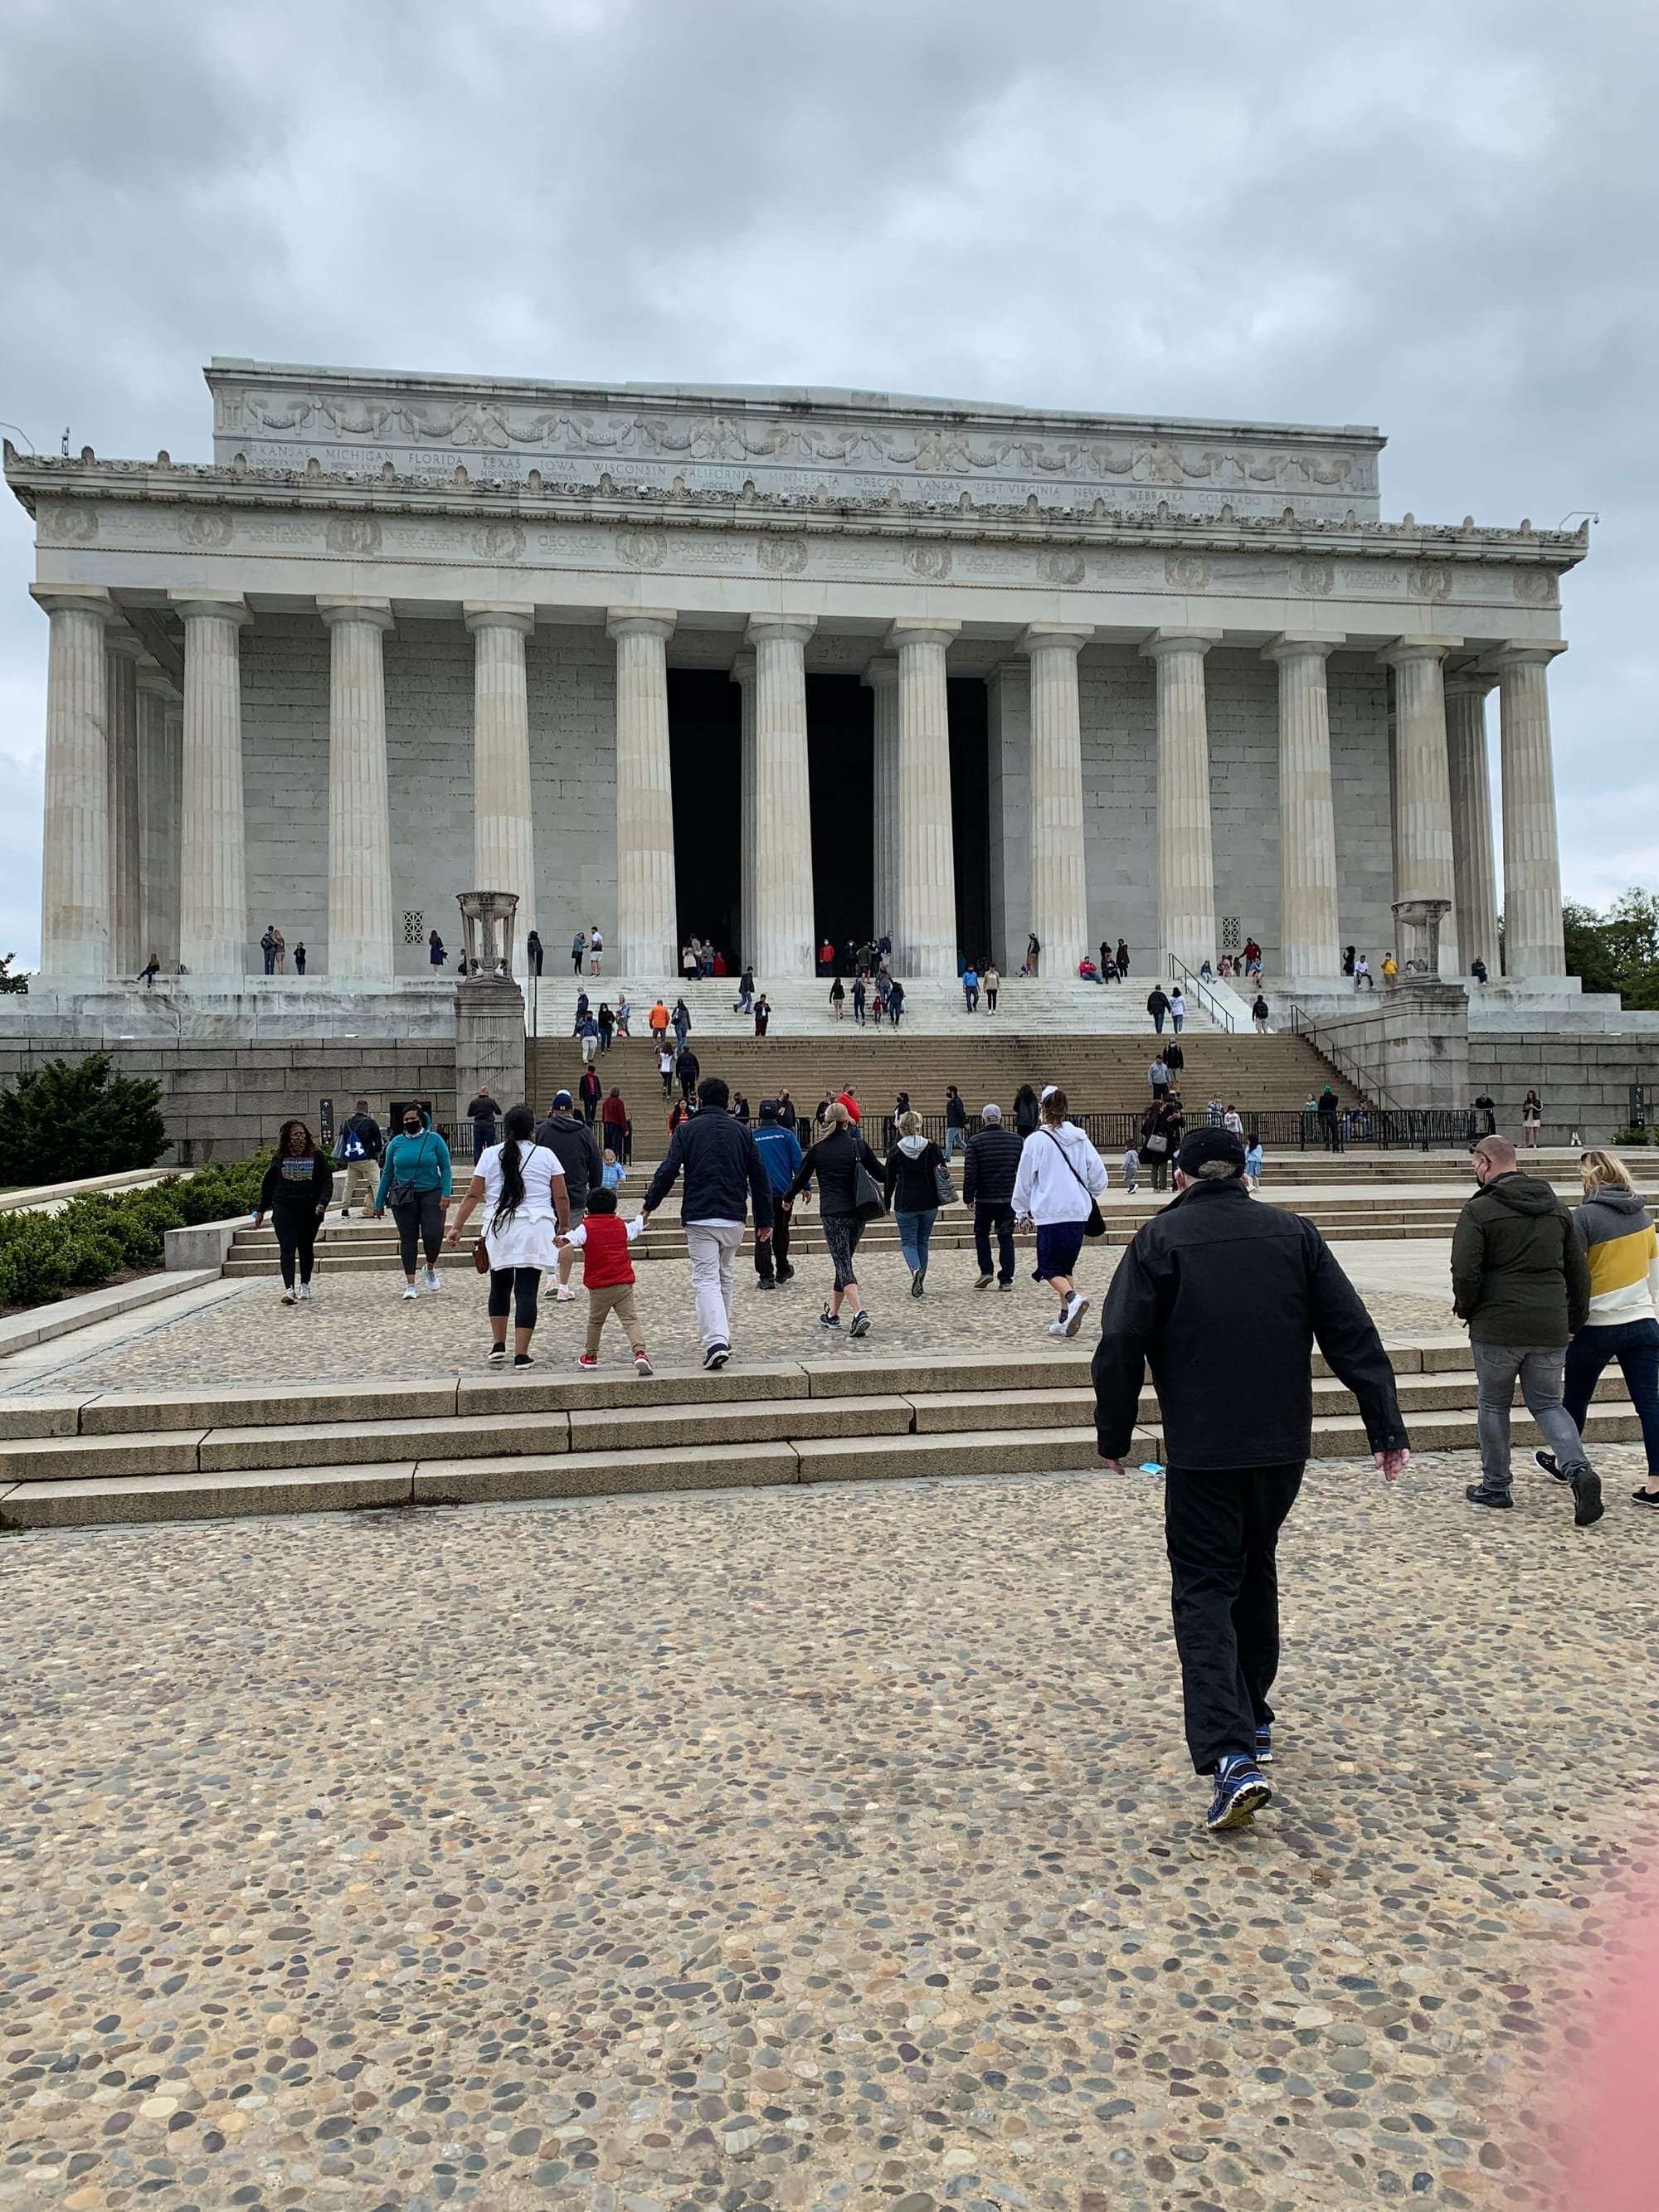 Approach to the Lincoln Memorial